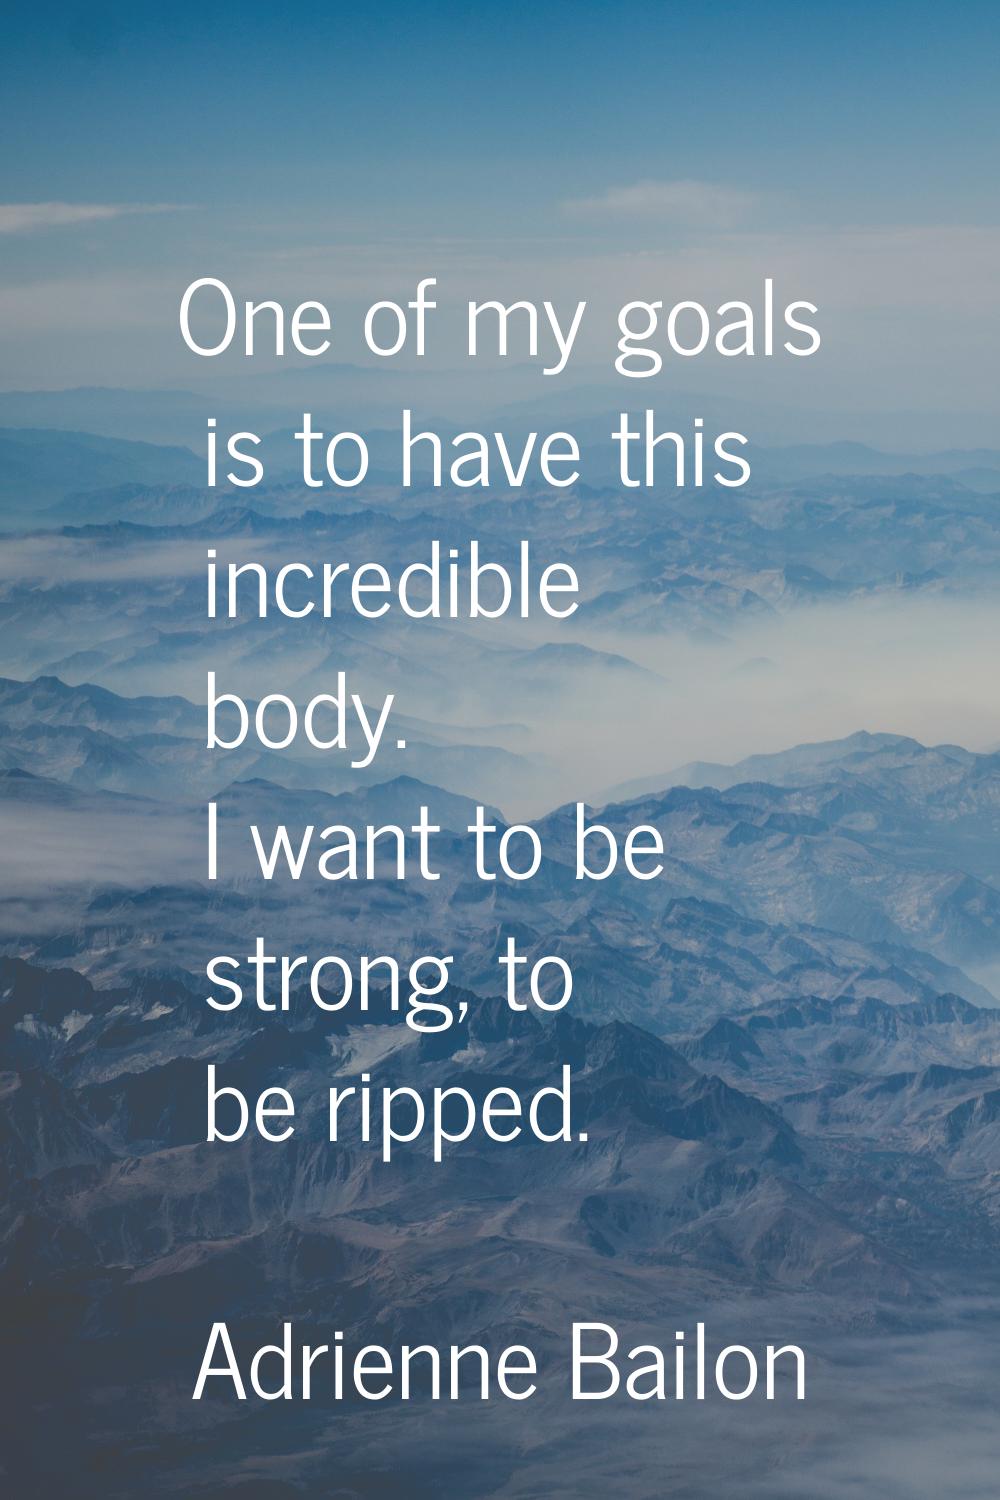 One of my goals is to have this incredible body. I want to be strong, to be ripped.